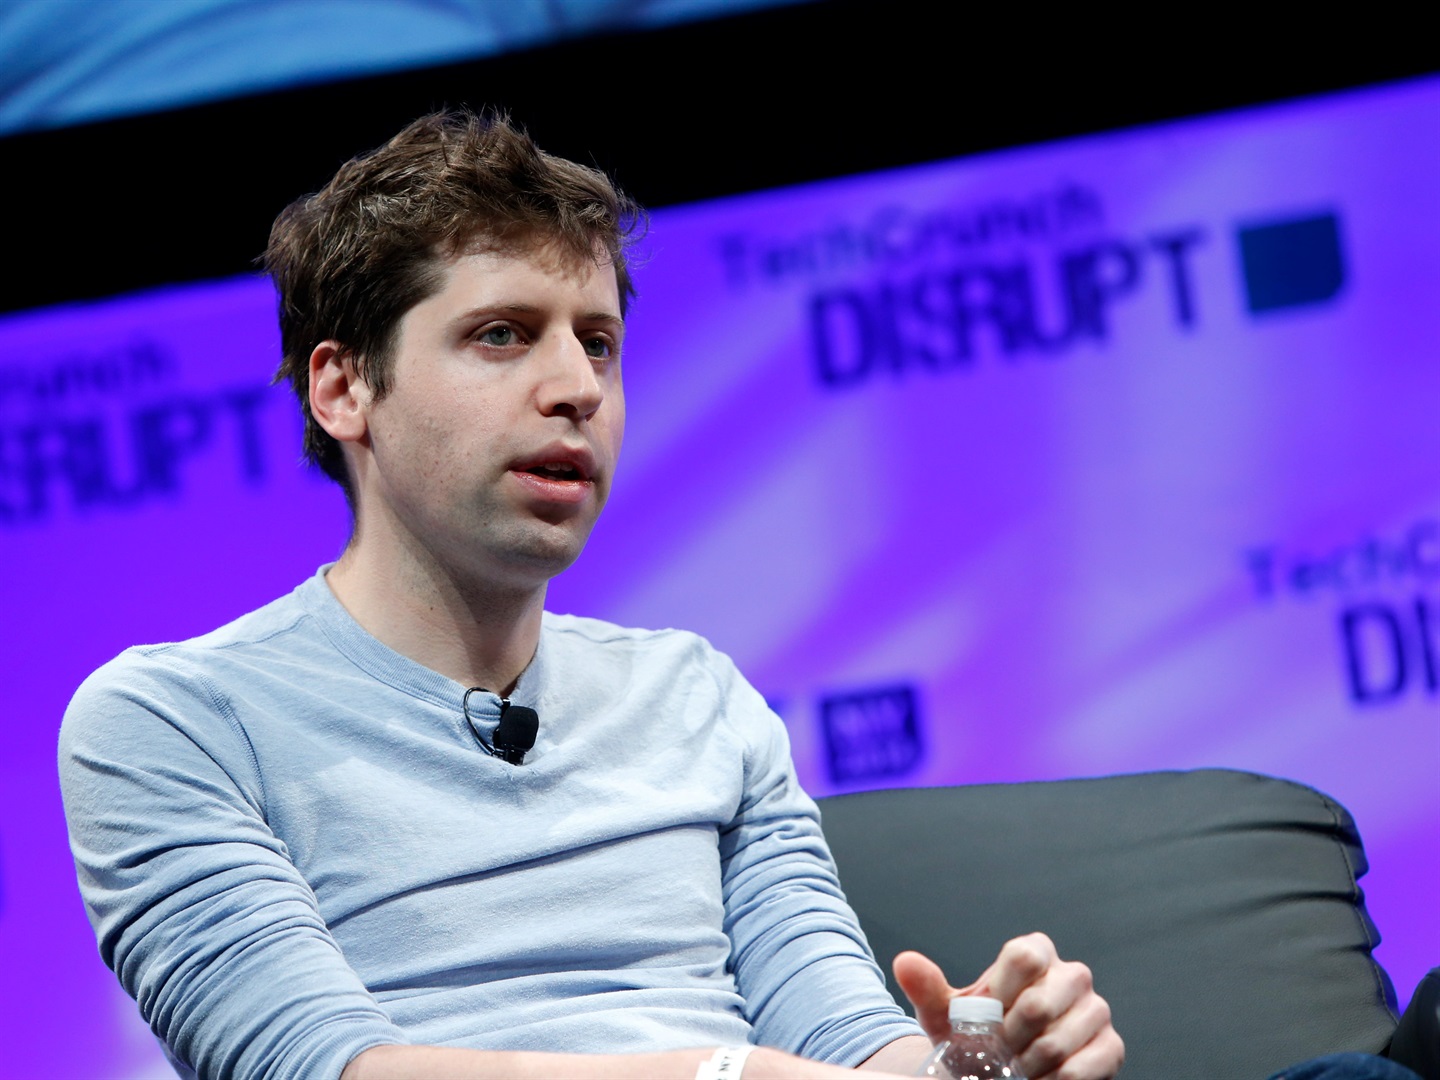 Ousted OpenAI CEO Altman discusses possible return, mulls new AI venture – source | Business